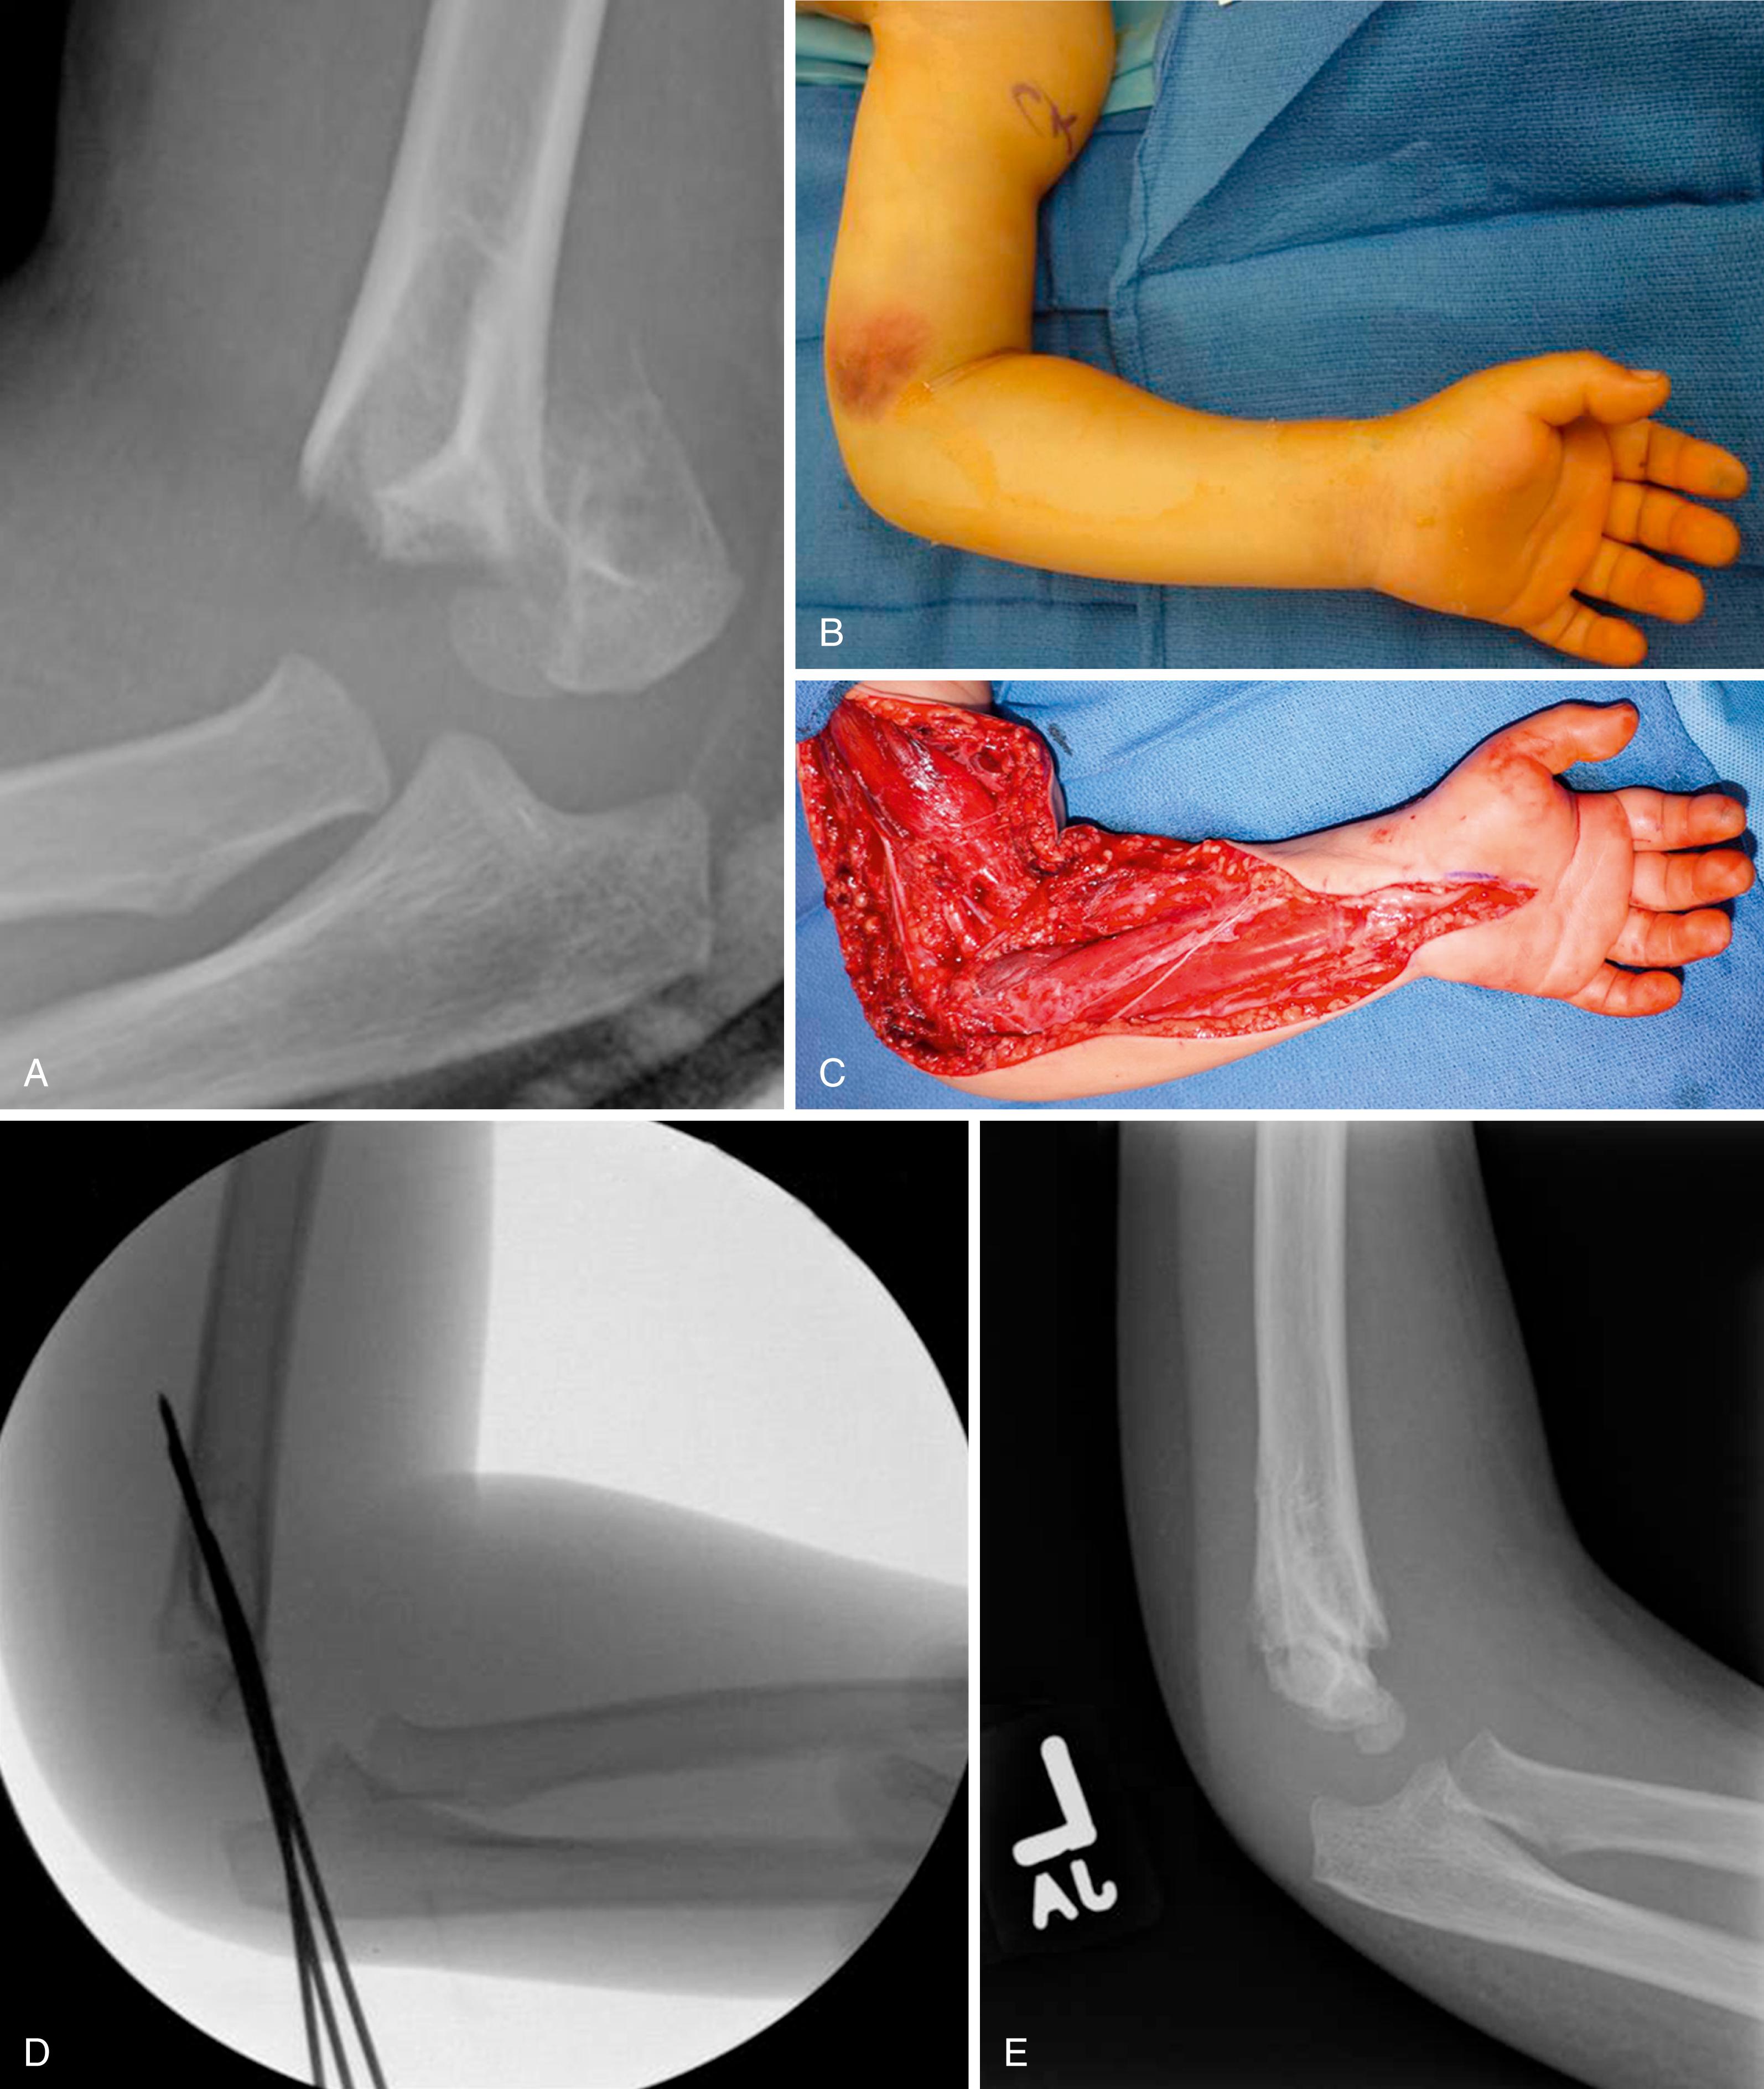 eFig. 51.3, Supracondylar humerus fracture. A, Gartland 4 SCH fracture. B, Clinical appearance at presentation. C, Intraoperative S/P fasciotomy. D, Intraoperative stabilization. E, Lateral radiograph at 1 year. F to I, Clinical outcome at 5 years.